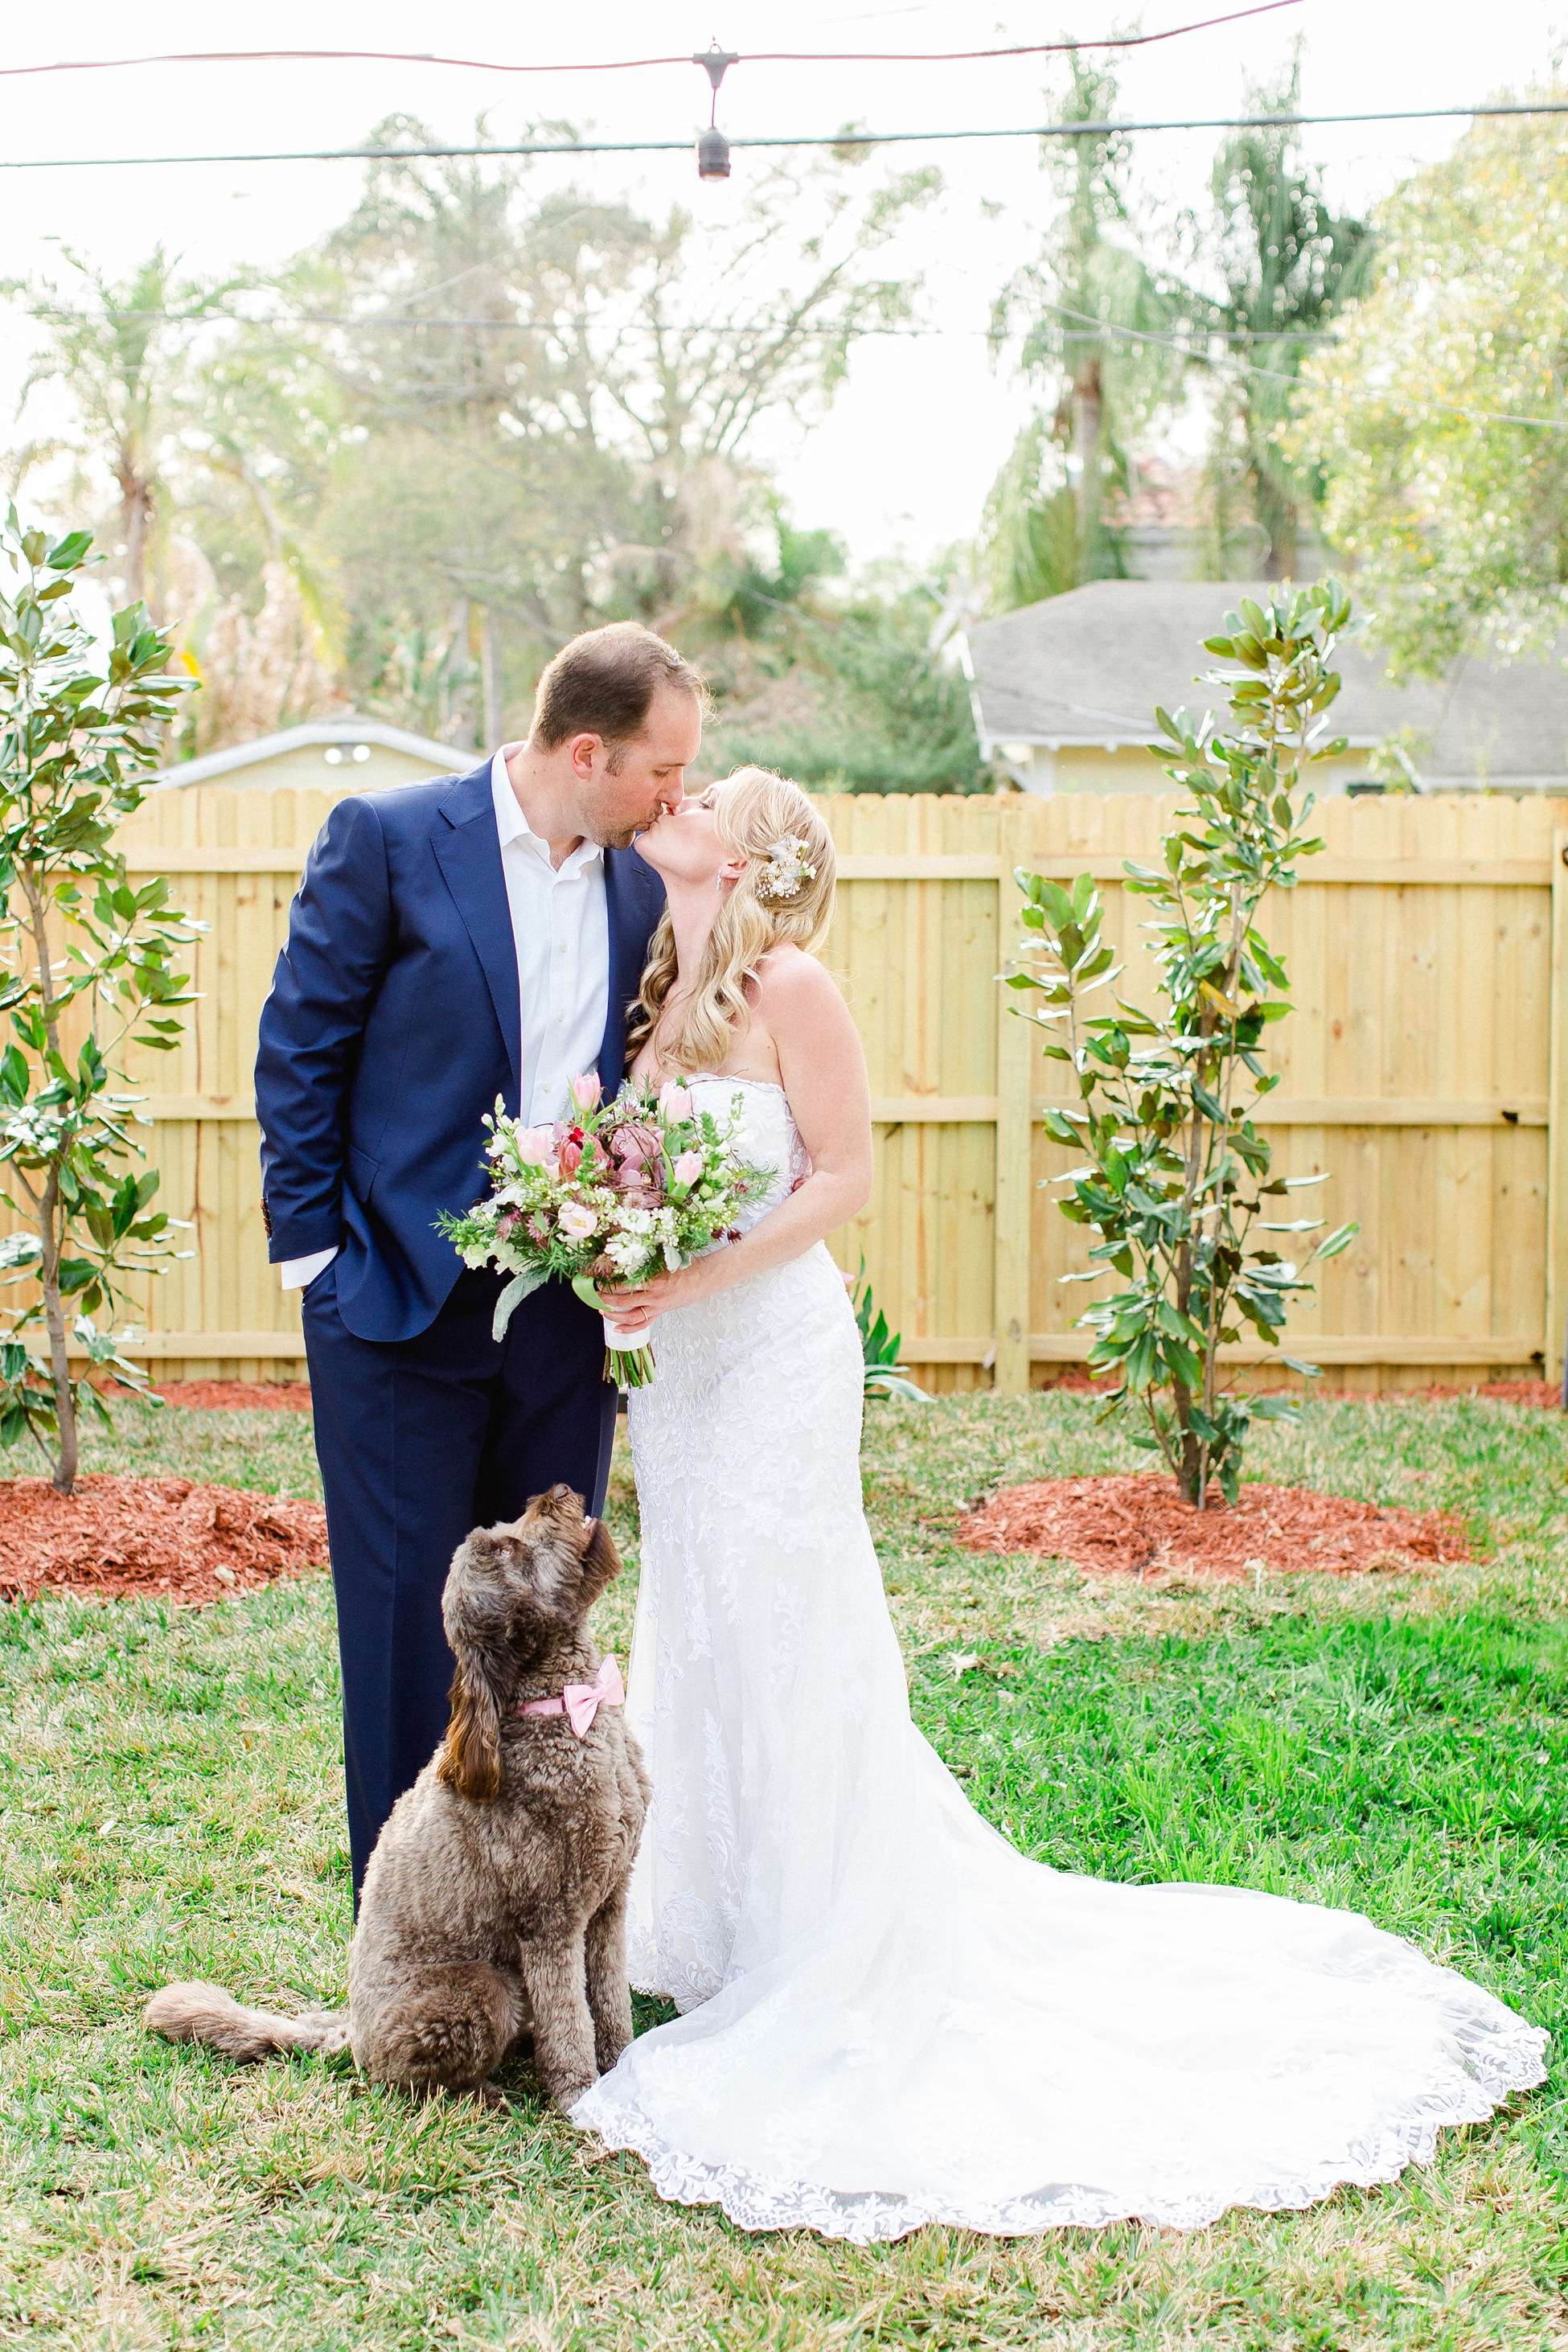 Tampa Wedding Photographer | © Ailyn La Torre Photography 2018